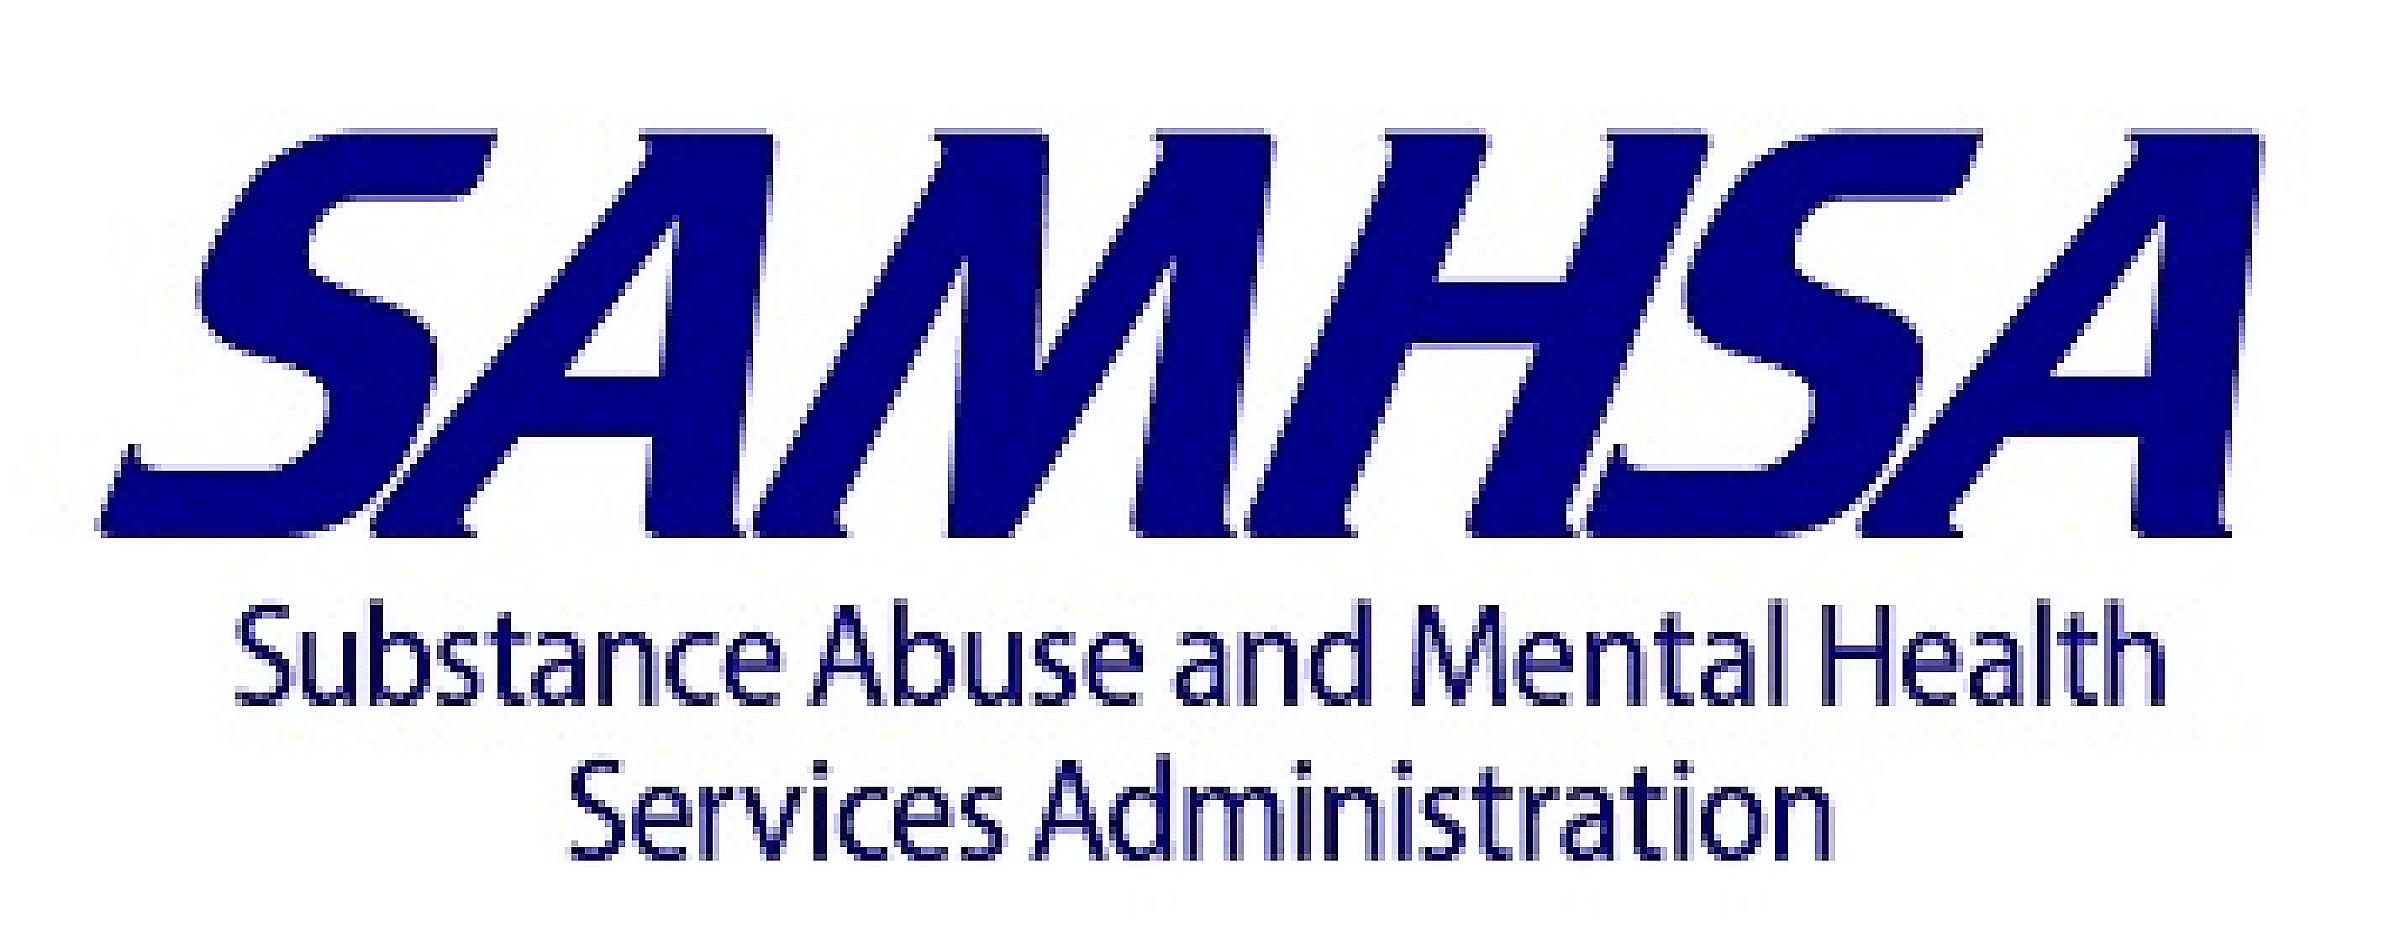 Picture of SAMHSA logo in navy blue text